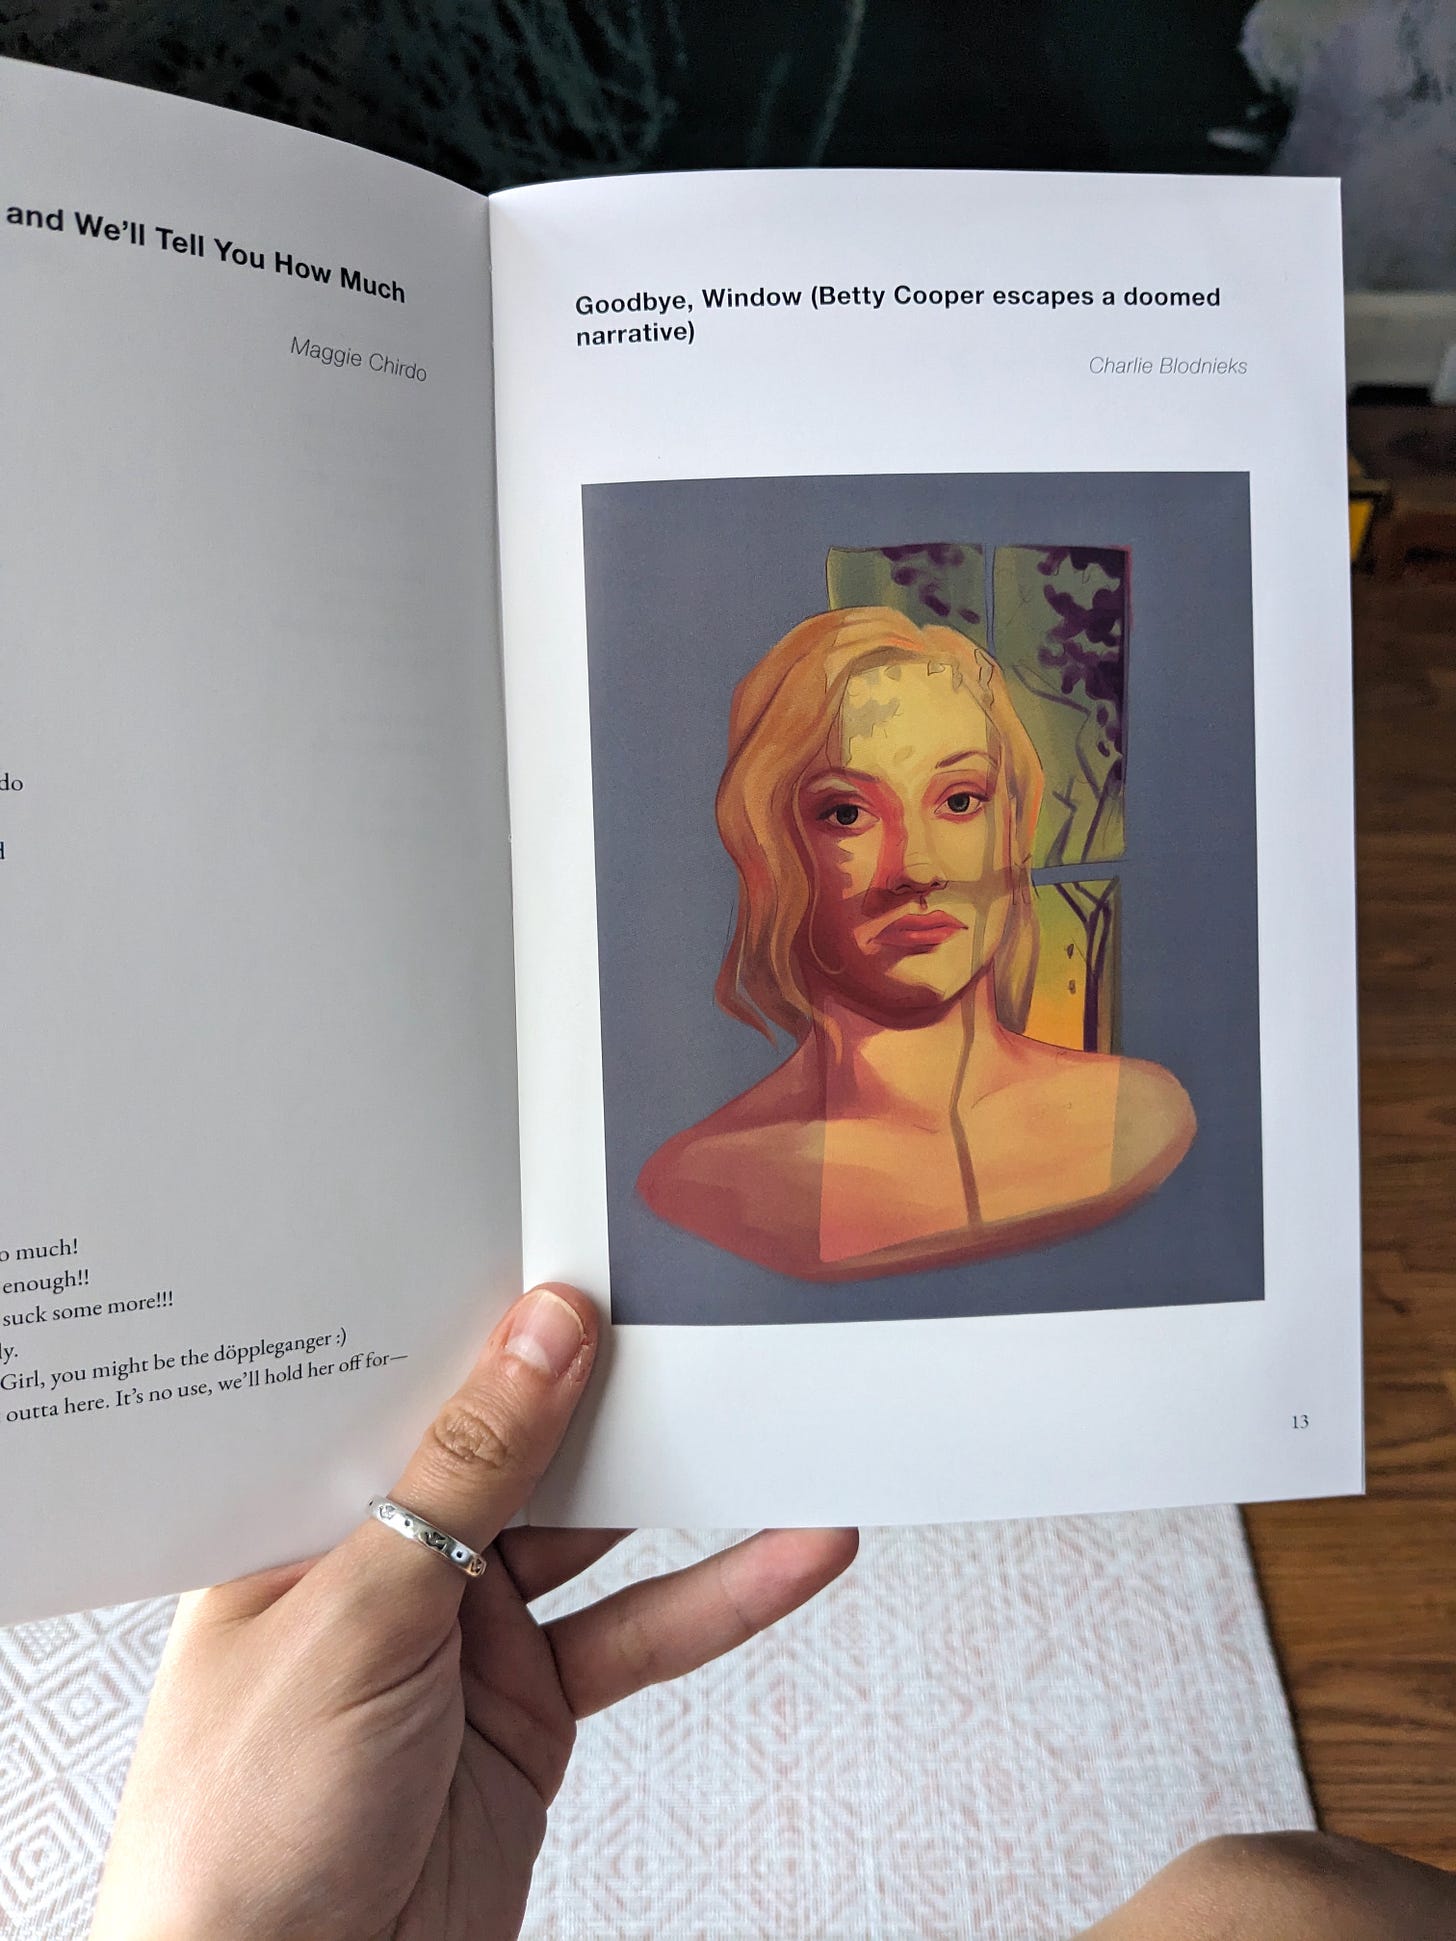 A page of the zine showing Betty Cooper-themed art by Charlie Blodnieks